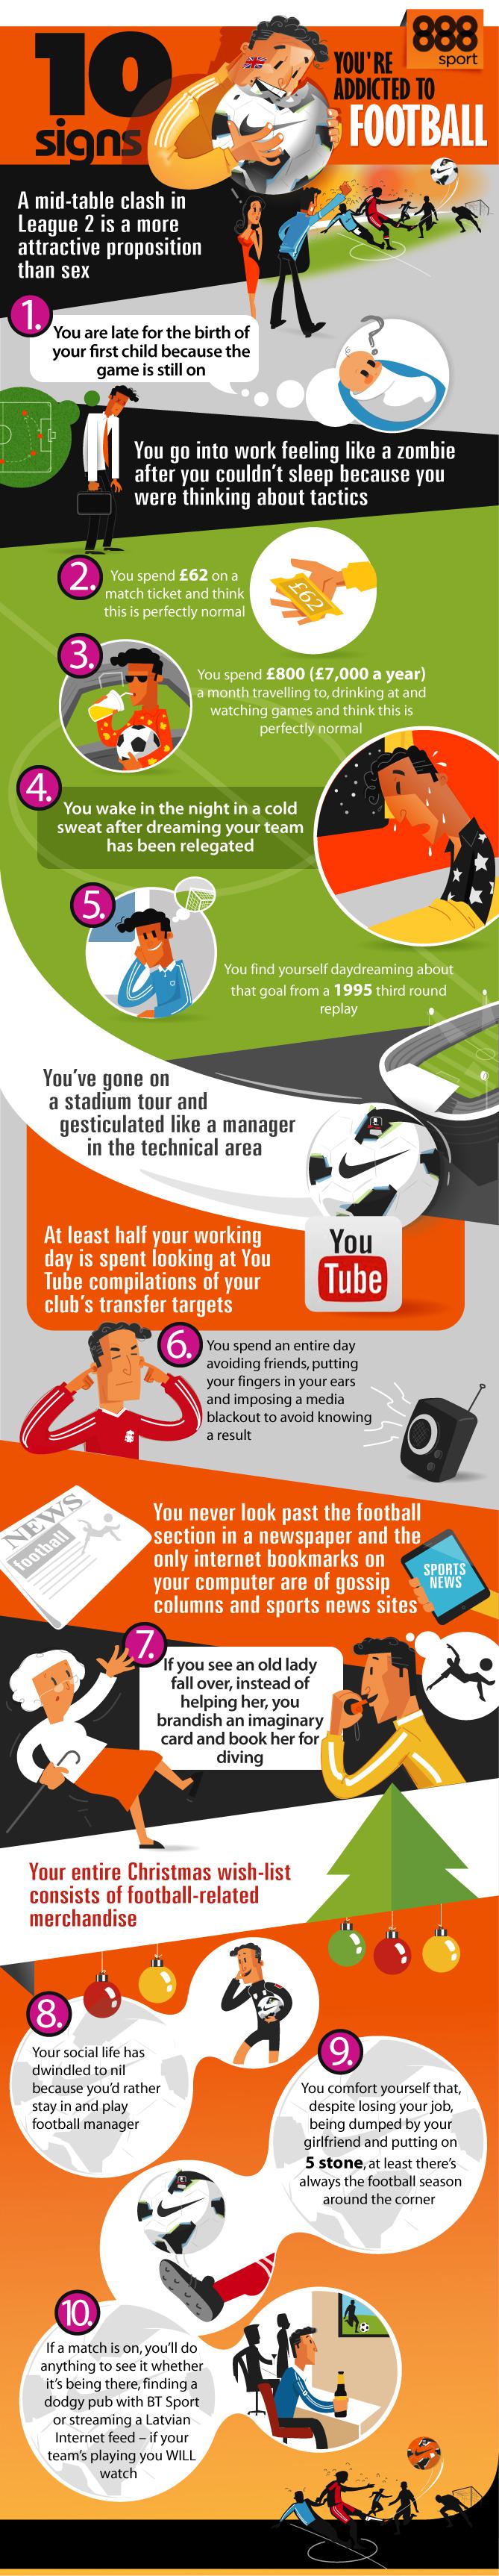 10 Signs You're Addicted to Football